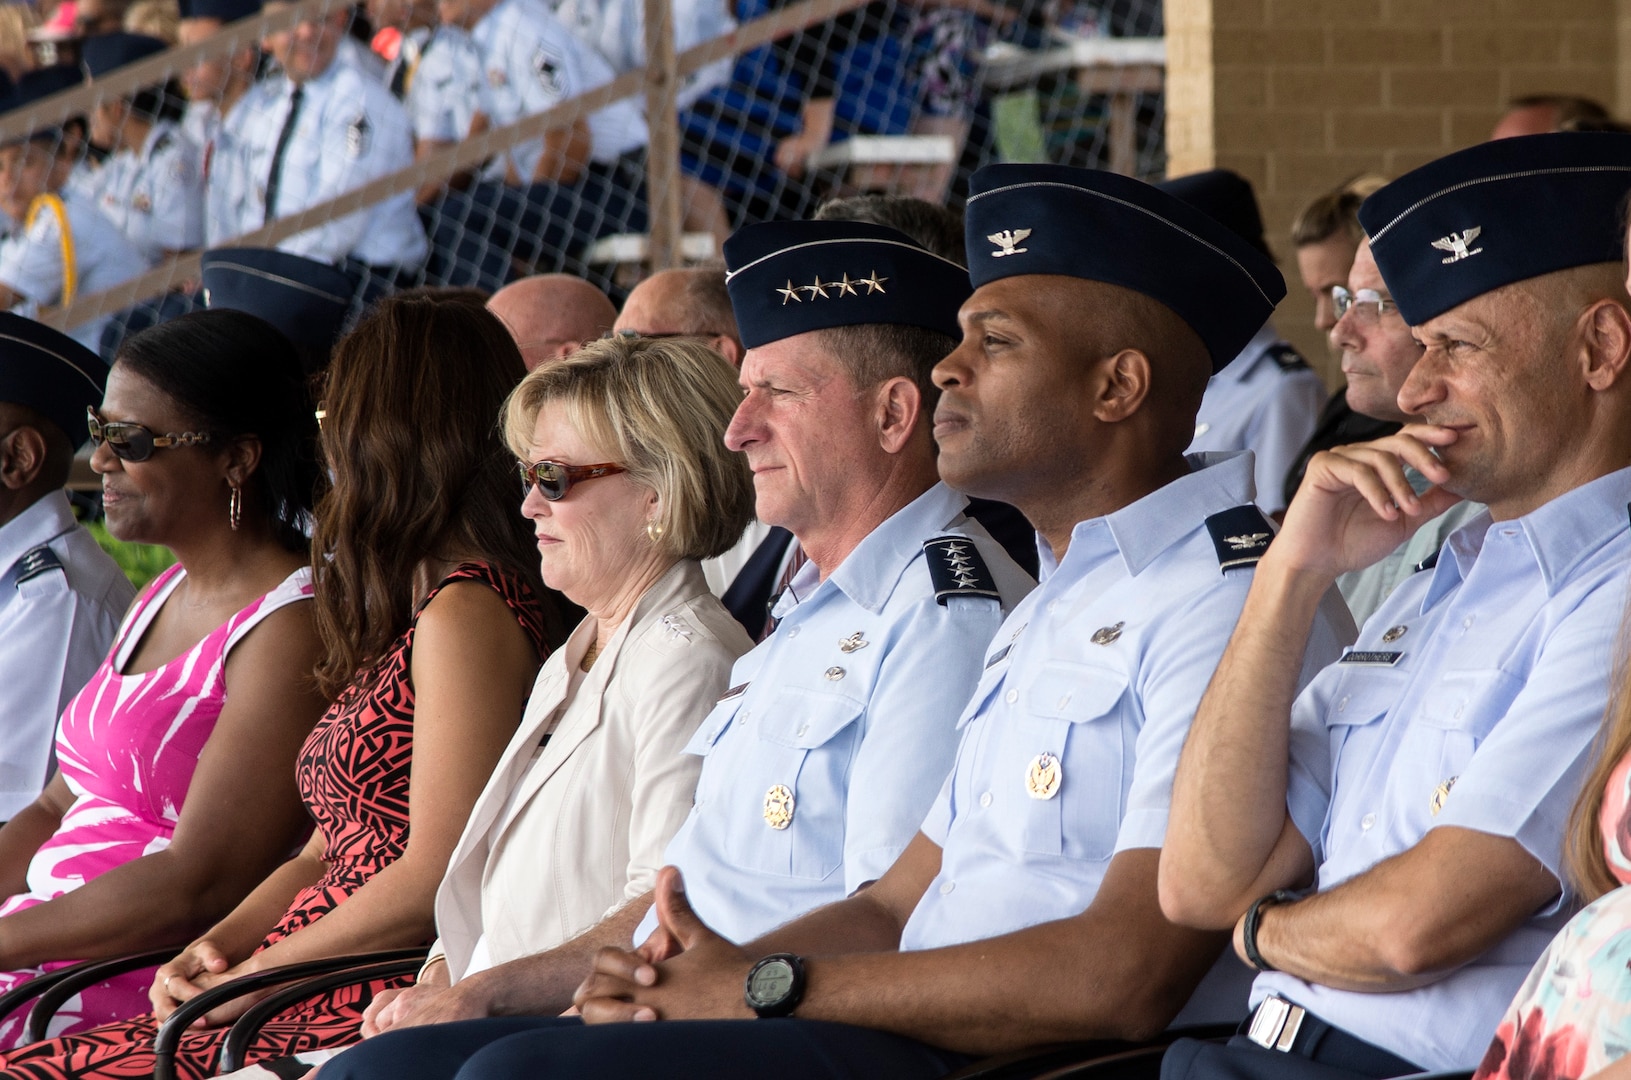 Air Force Chief of Staff Gen. David Goldfein observes the Air Force's newest Airmen during a basic military training graduation June 16, 2017, at Joint Base San Antonio-Lackland. Goldfein toured various JBSA-Lackland facilities and met many 37th Training Wing Airmen during his two-day visit. Every enlisted Airmen begins their Air Force career at basic military training. JBSA-Lackland is often referred to as the "Gateway to the Air Force," graduating about 39,000 Airmen annually. Basic military training is one of the missions of the 37th Training Wing, the largest training wing in the United States Air Force. (U.S. Air Force photo by Johnny Saldivar)